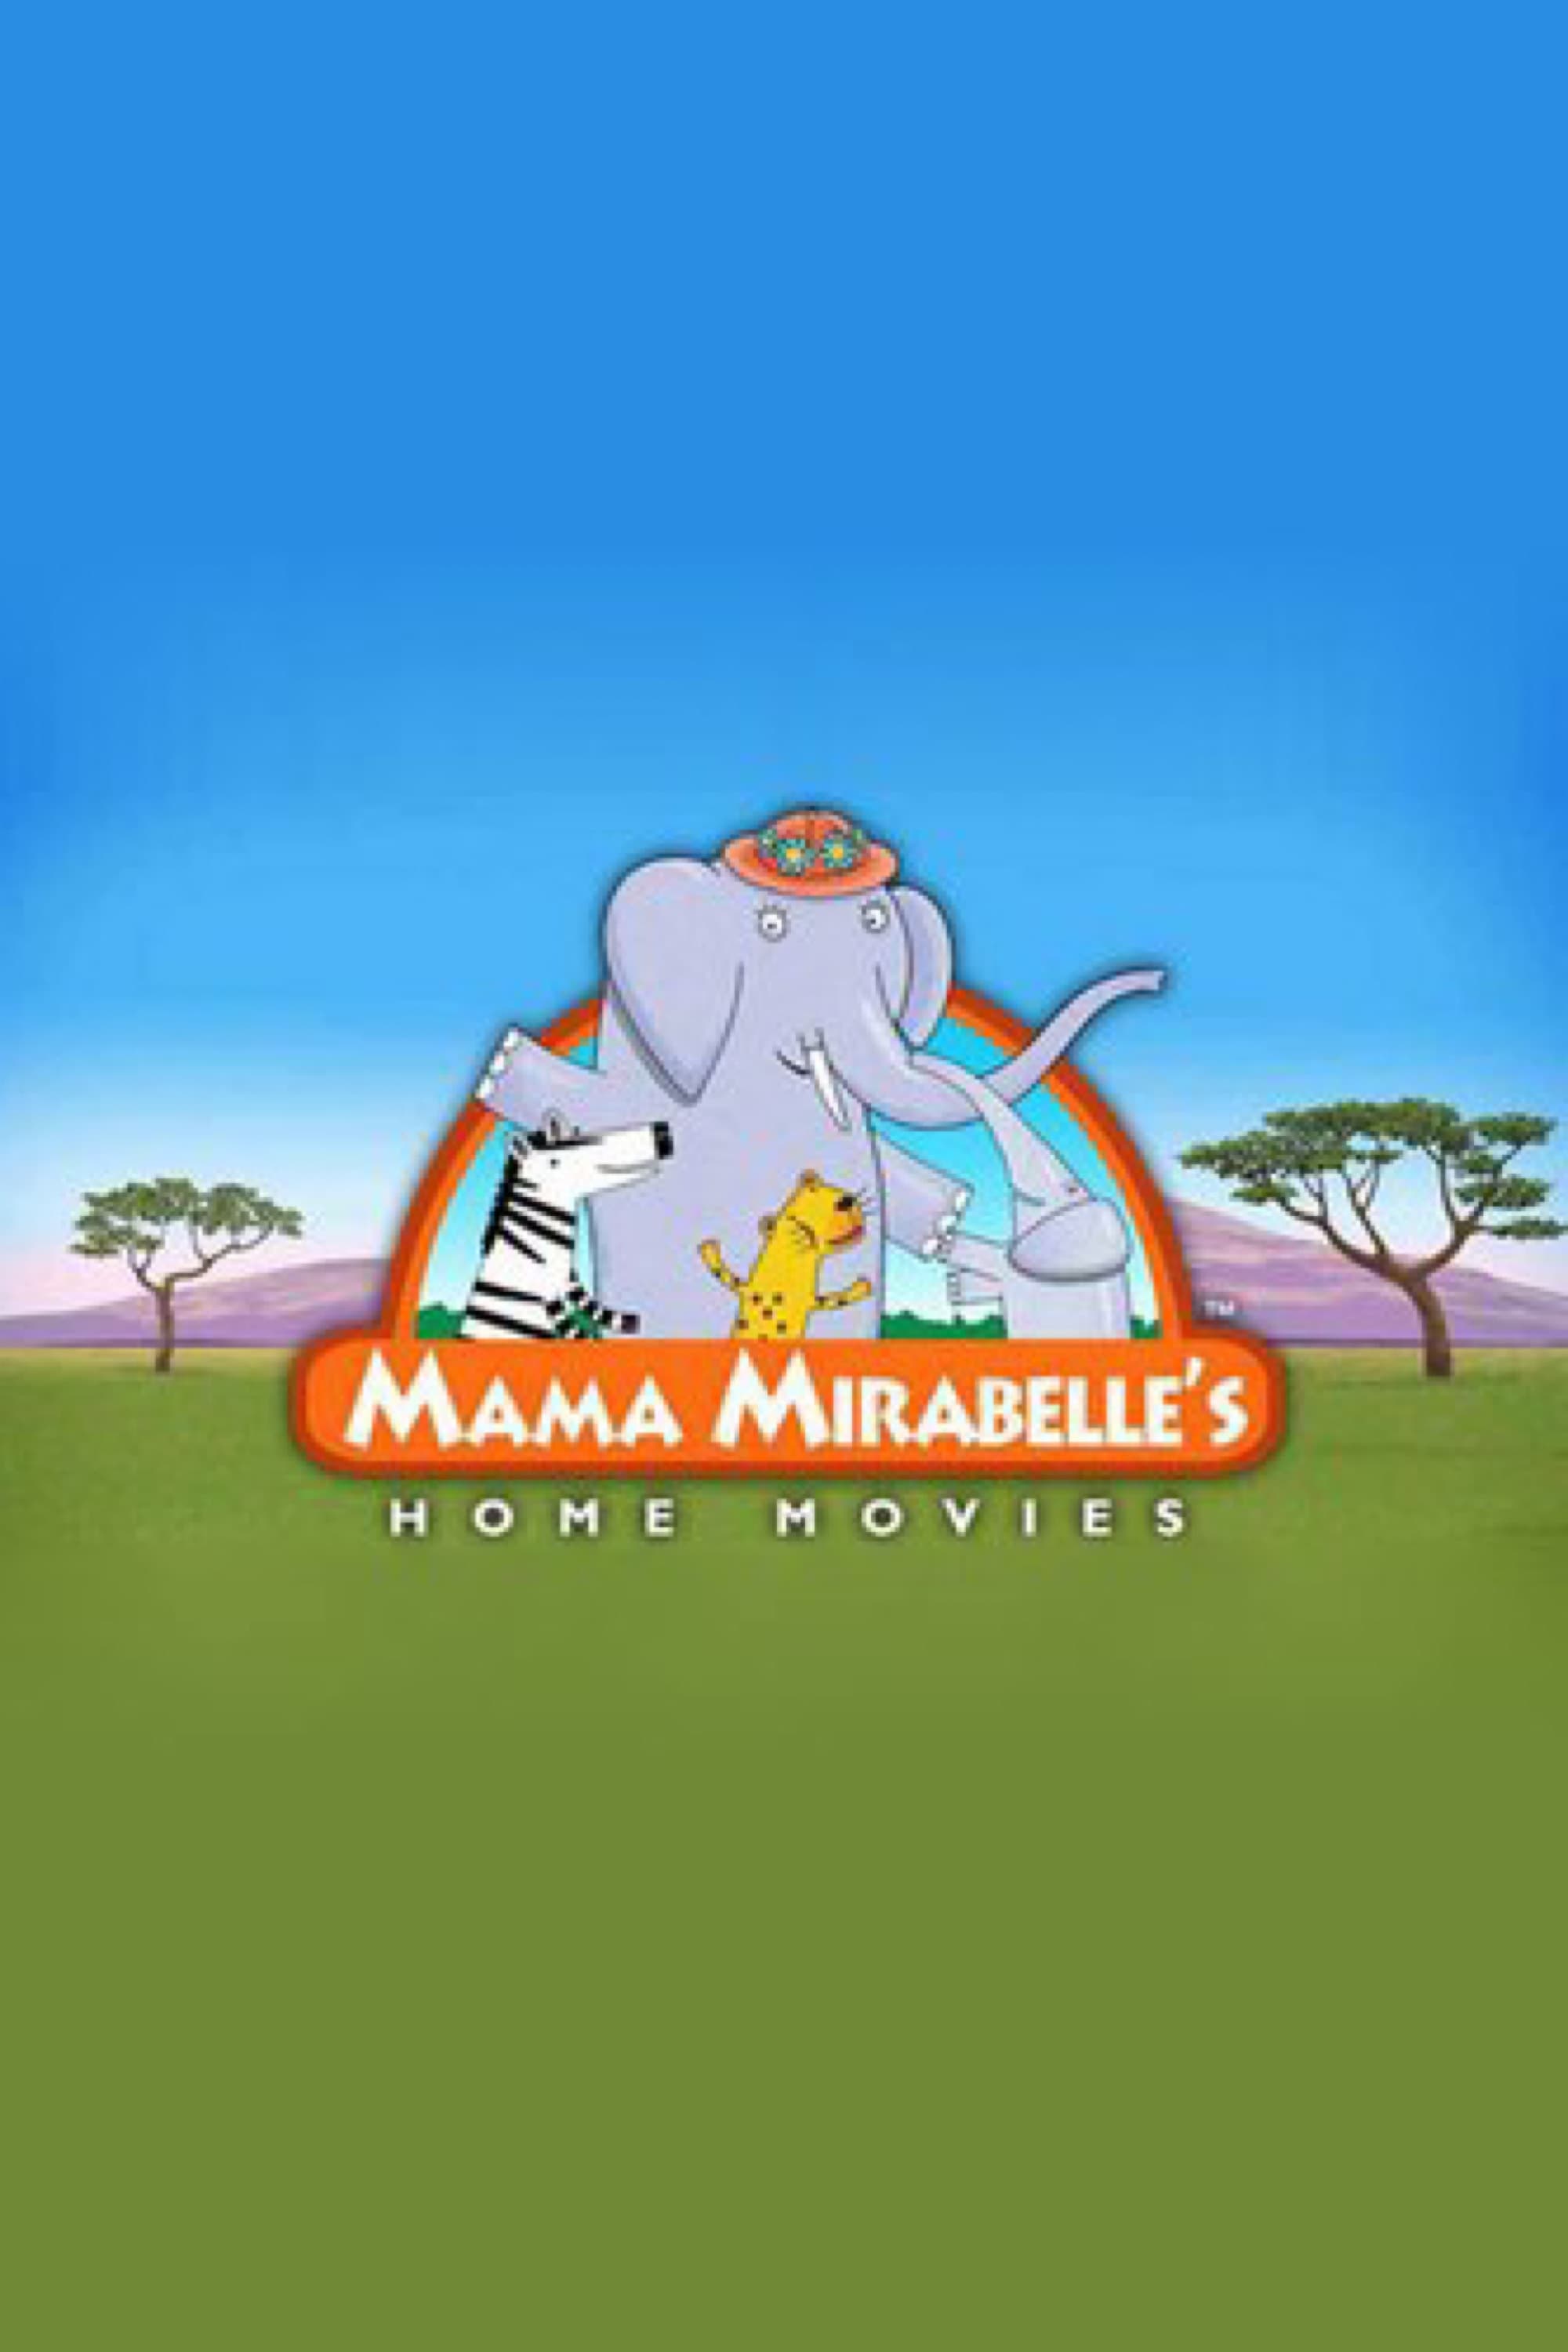 Mama Mirabelle's Home Movies (2007)